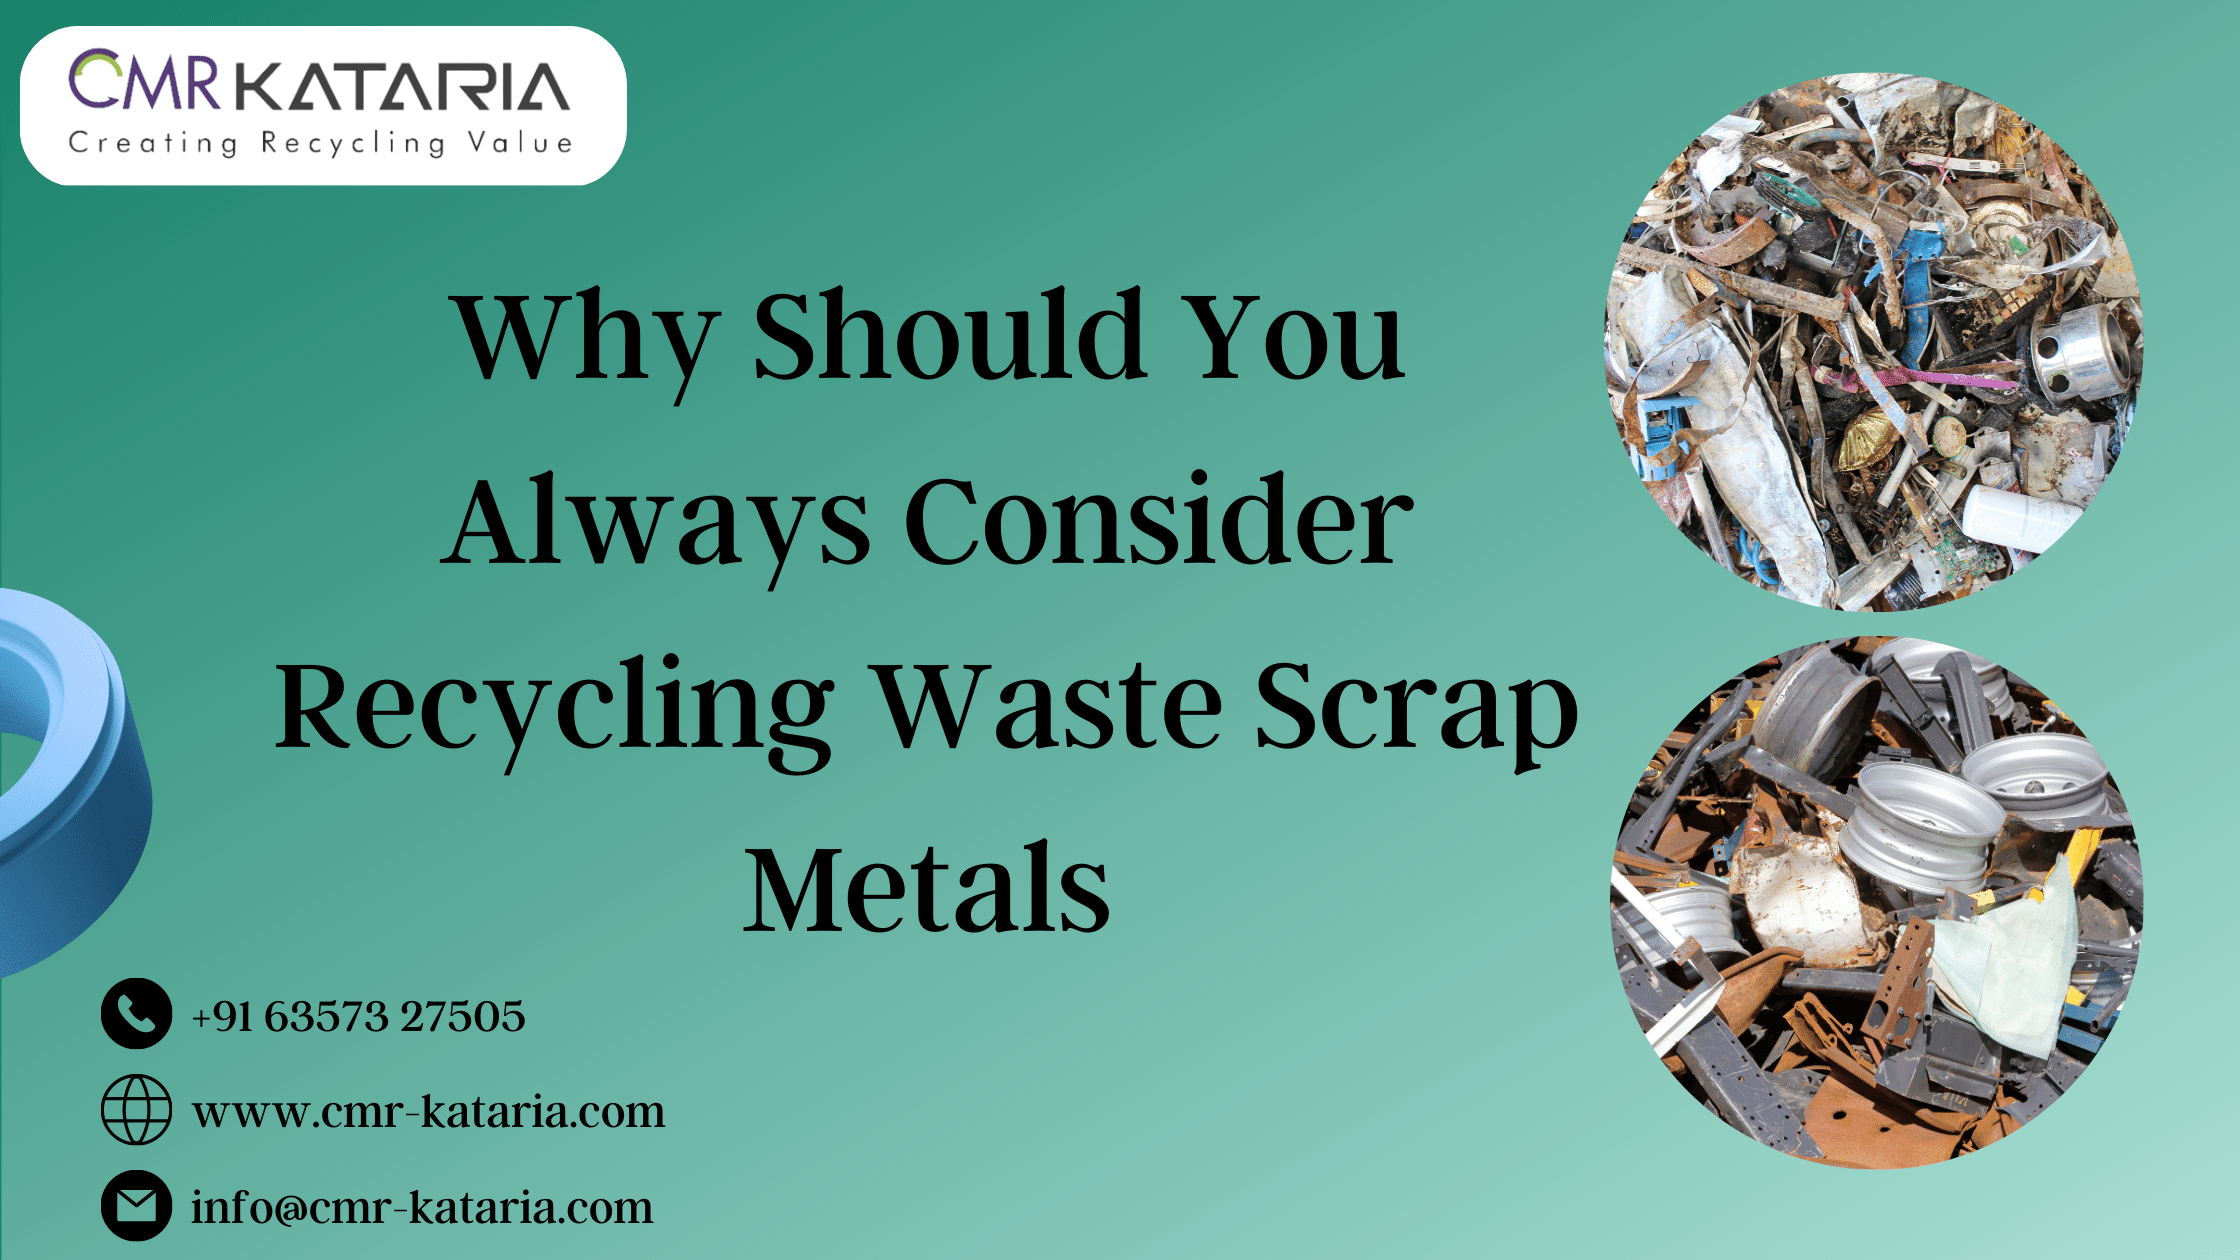 Why Should You Always Consider Recycling Waste Scrap Metals